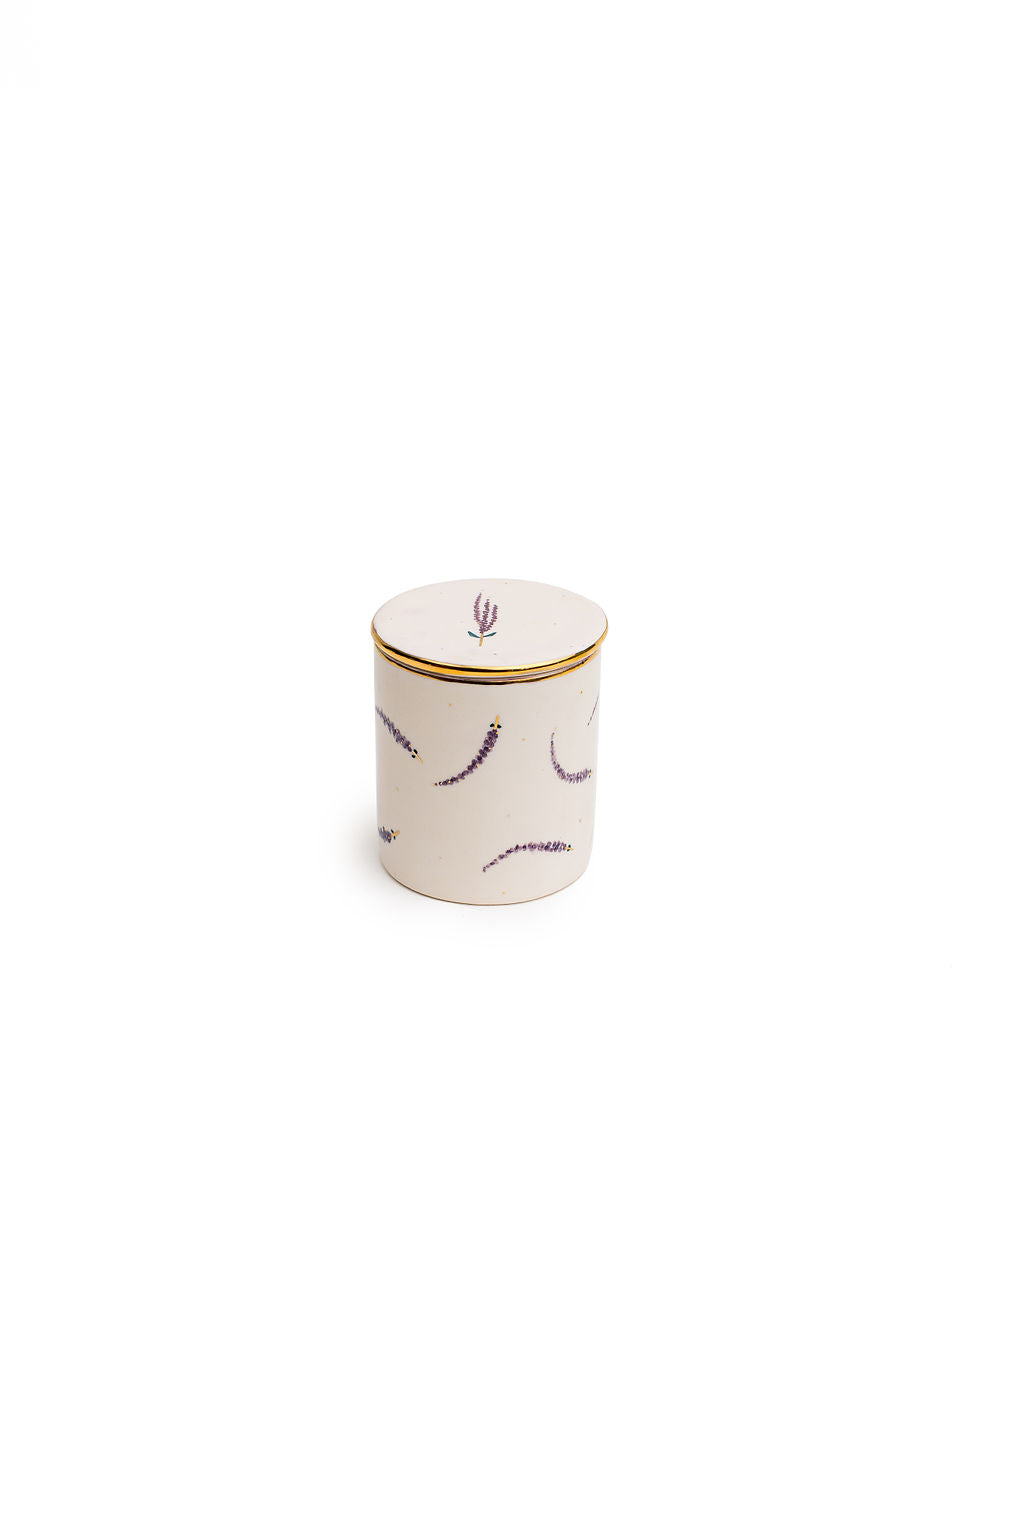 Small Lavender Canister